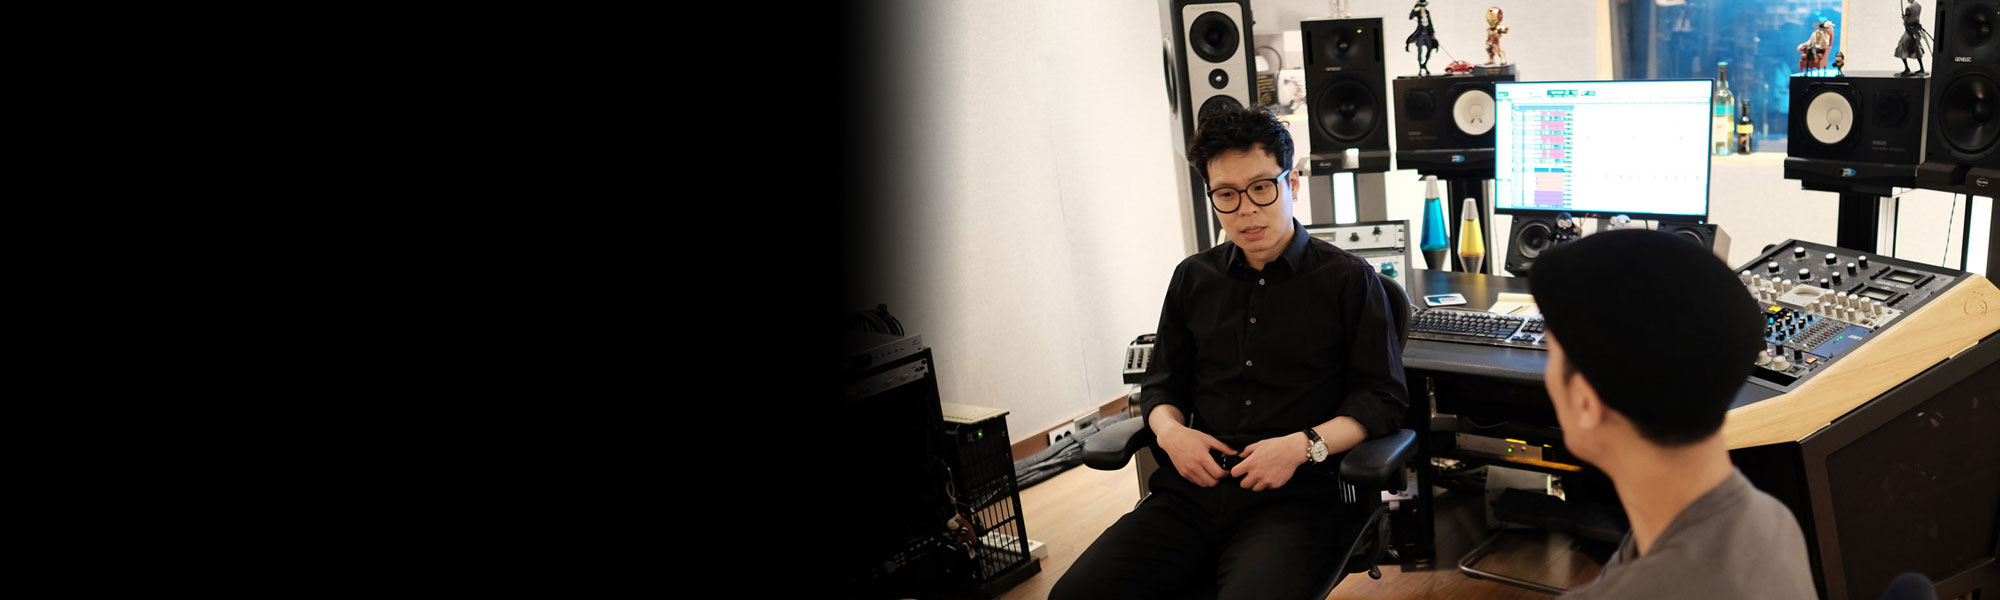 Interview with Jong-pil Gu, about recording and mixing with Antelope Audio